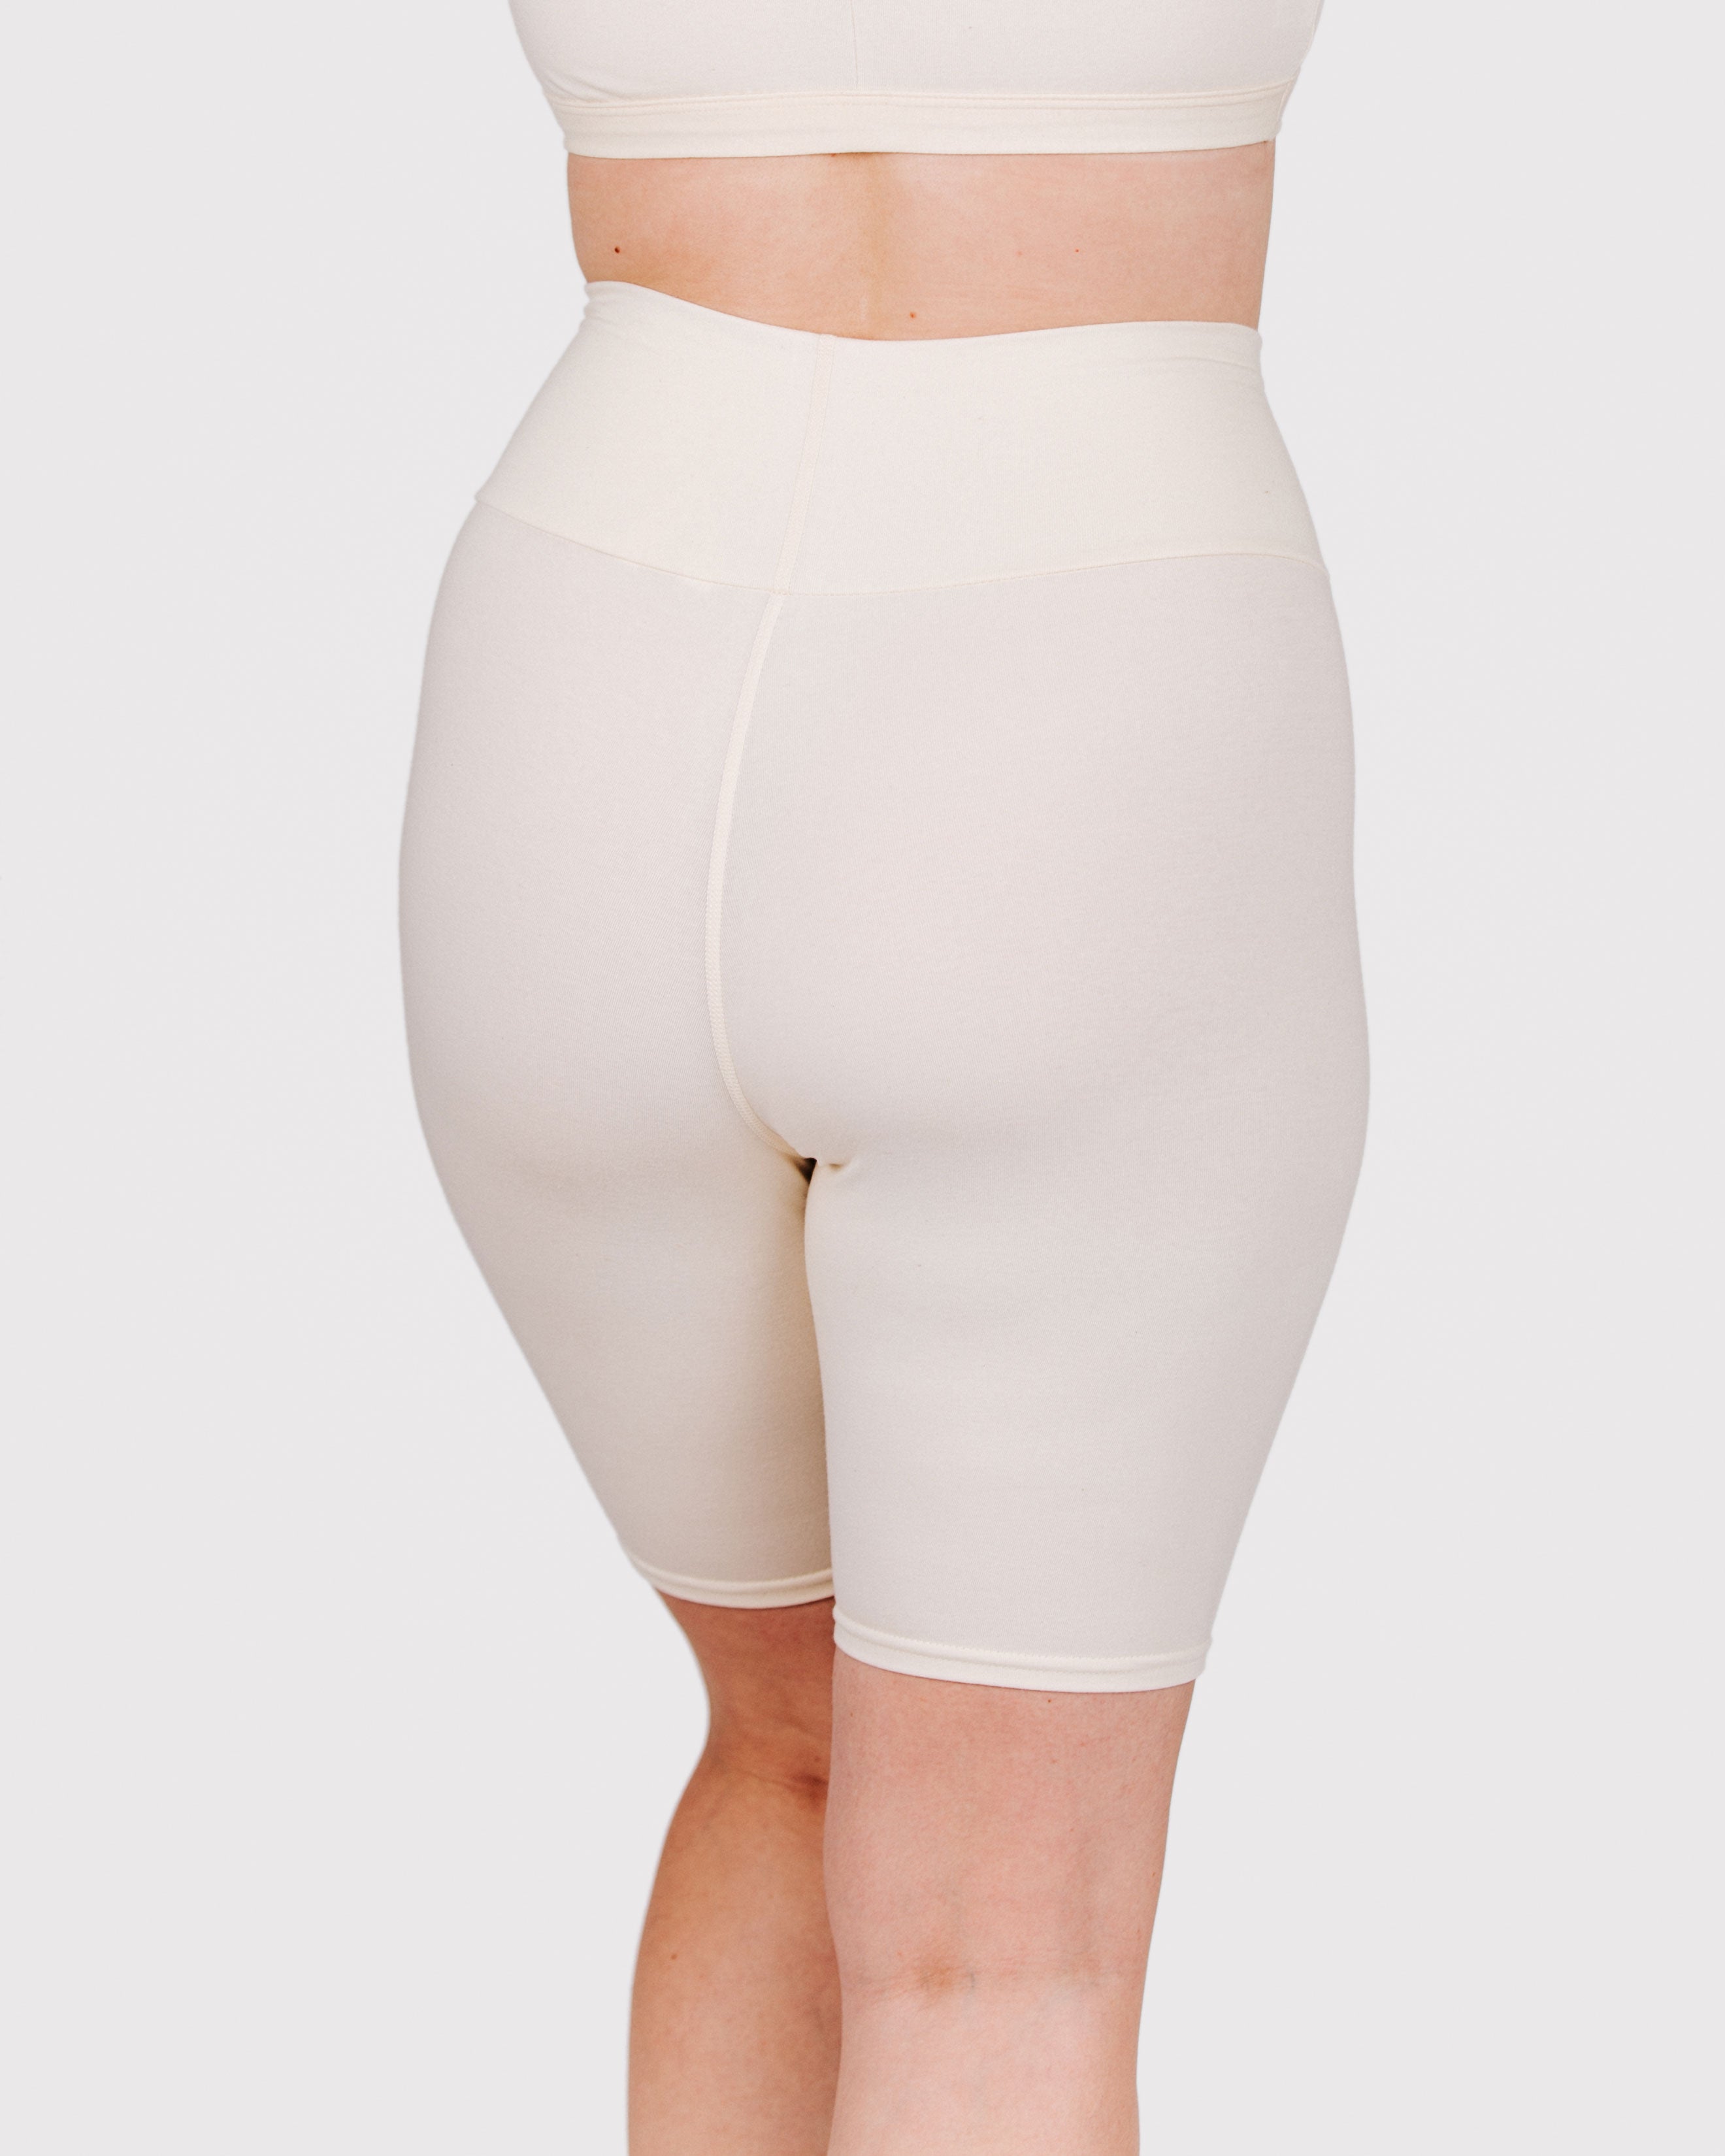 Fit photo from the back of Thunderpants organic cotton Bike Shorts in off-white on a model.